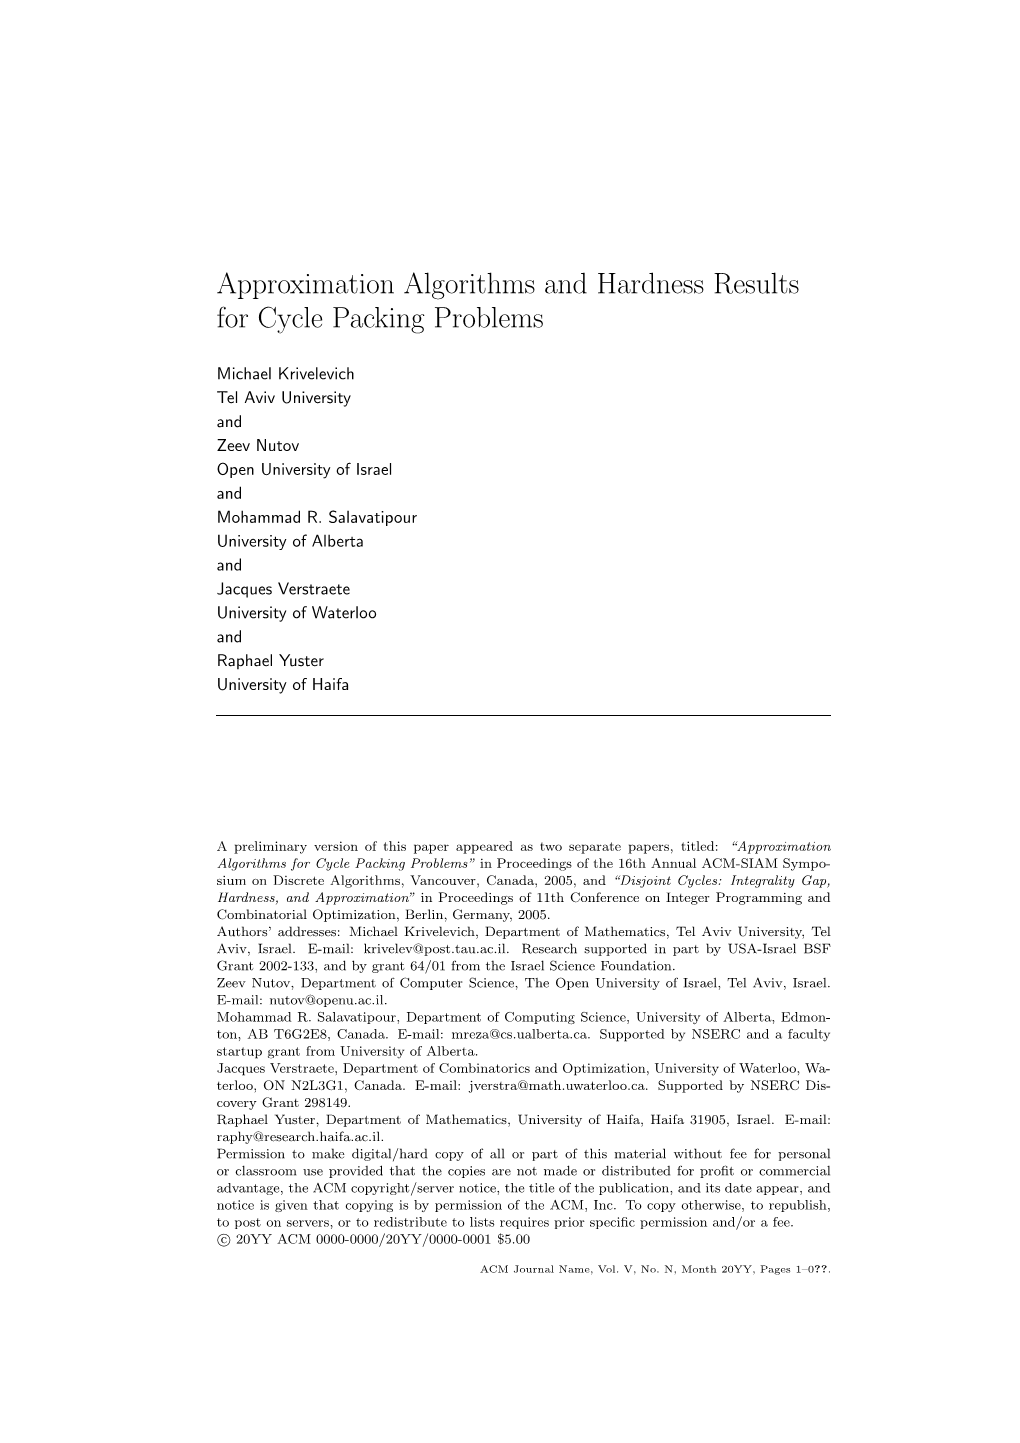 Approximation Algorithms and Hardness Results for Cycle Packing Problems